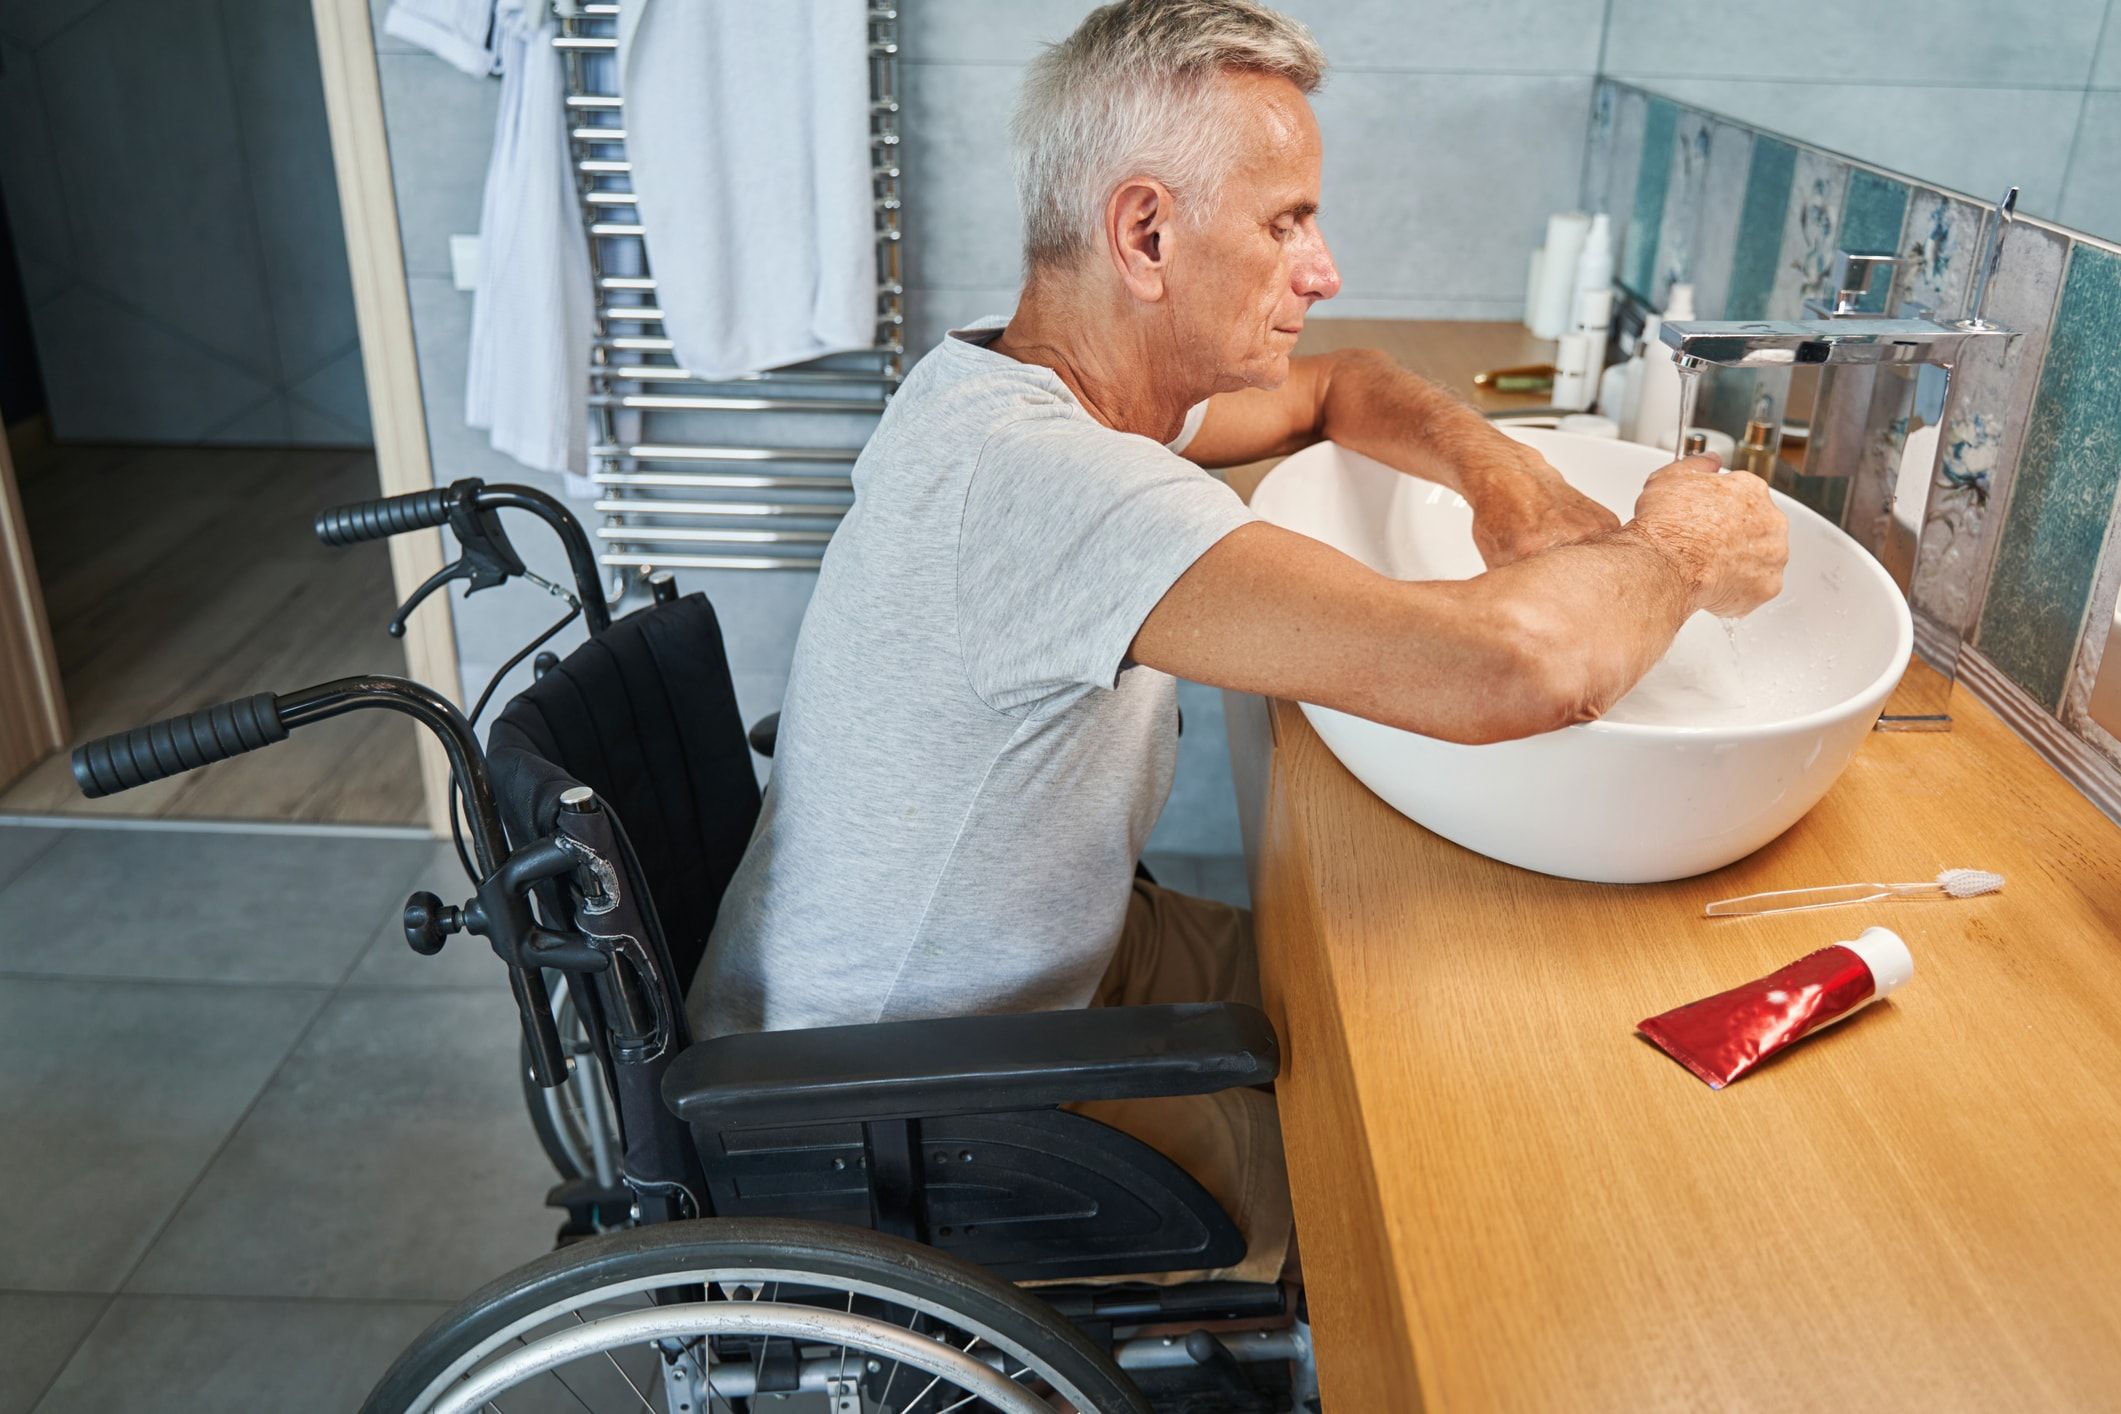 Creating an accessible bathroom: Tips and tricks from experts